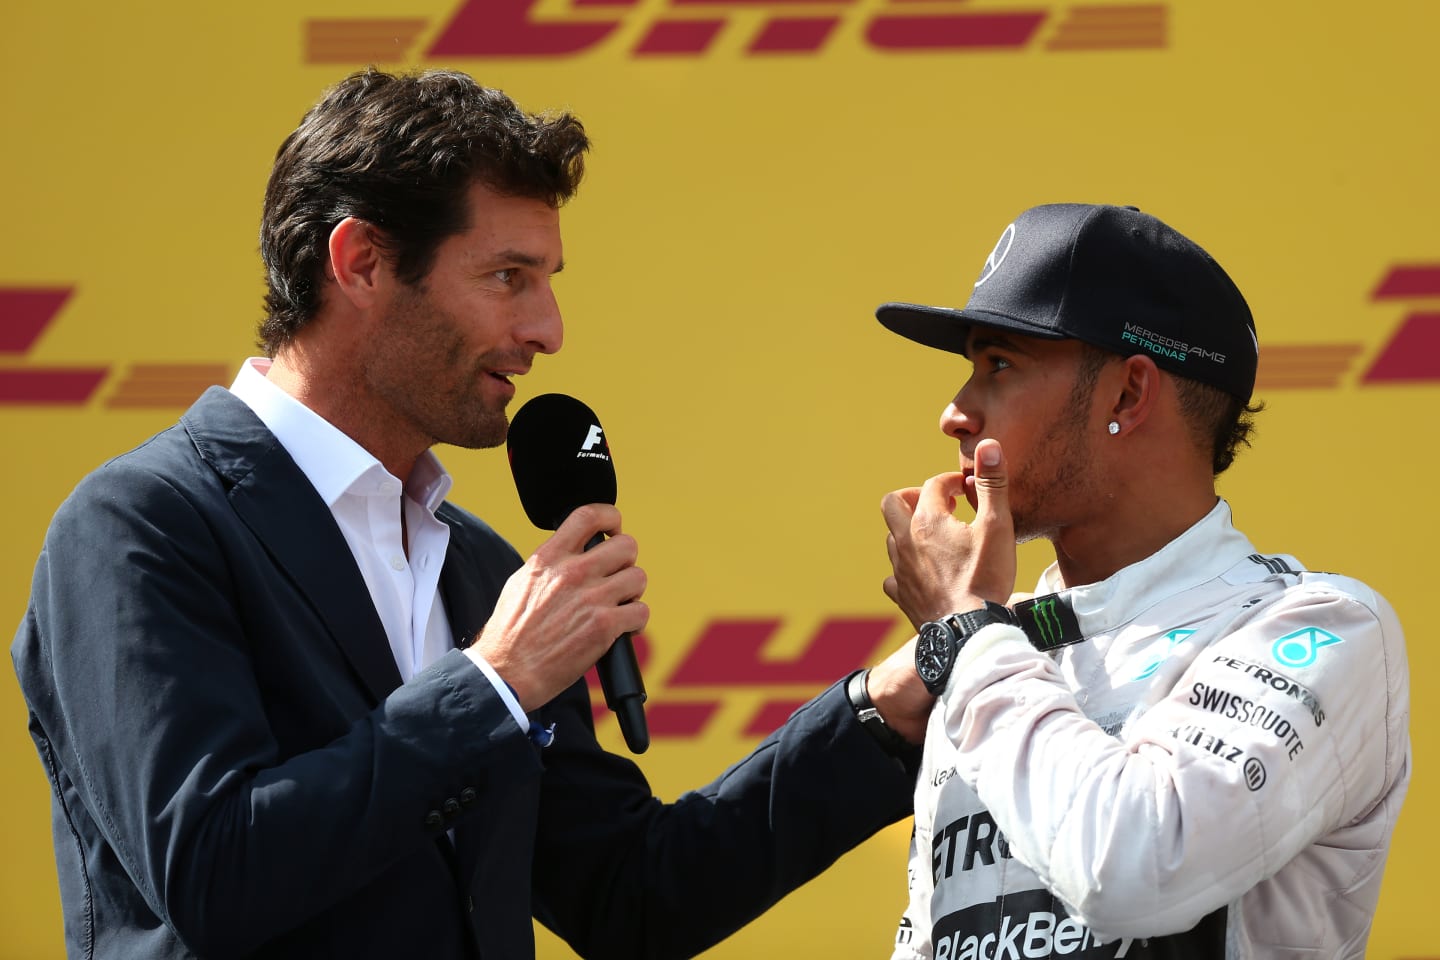 SPIELBERG, AUSTRIA - JUNE 22:  Lewis Hamilton of Great Britain and Mercedes GP speaks with former